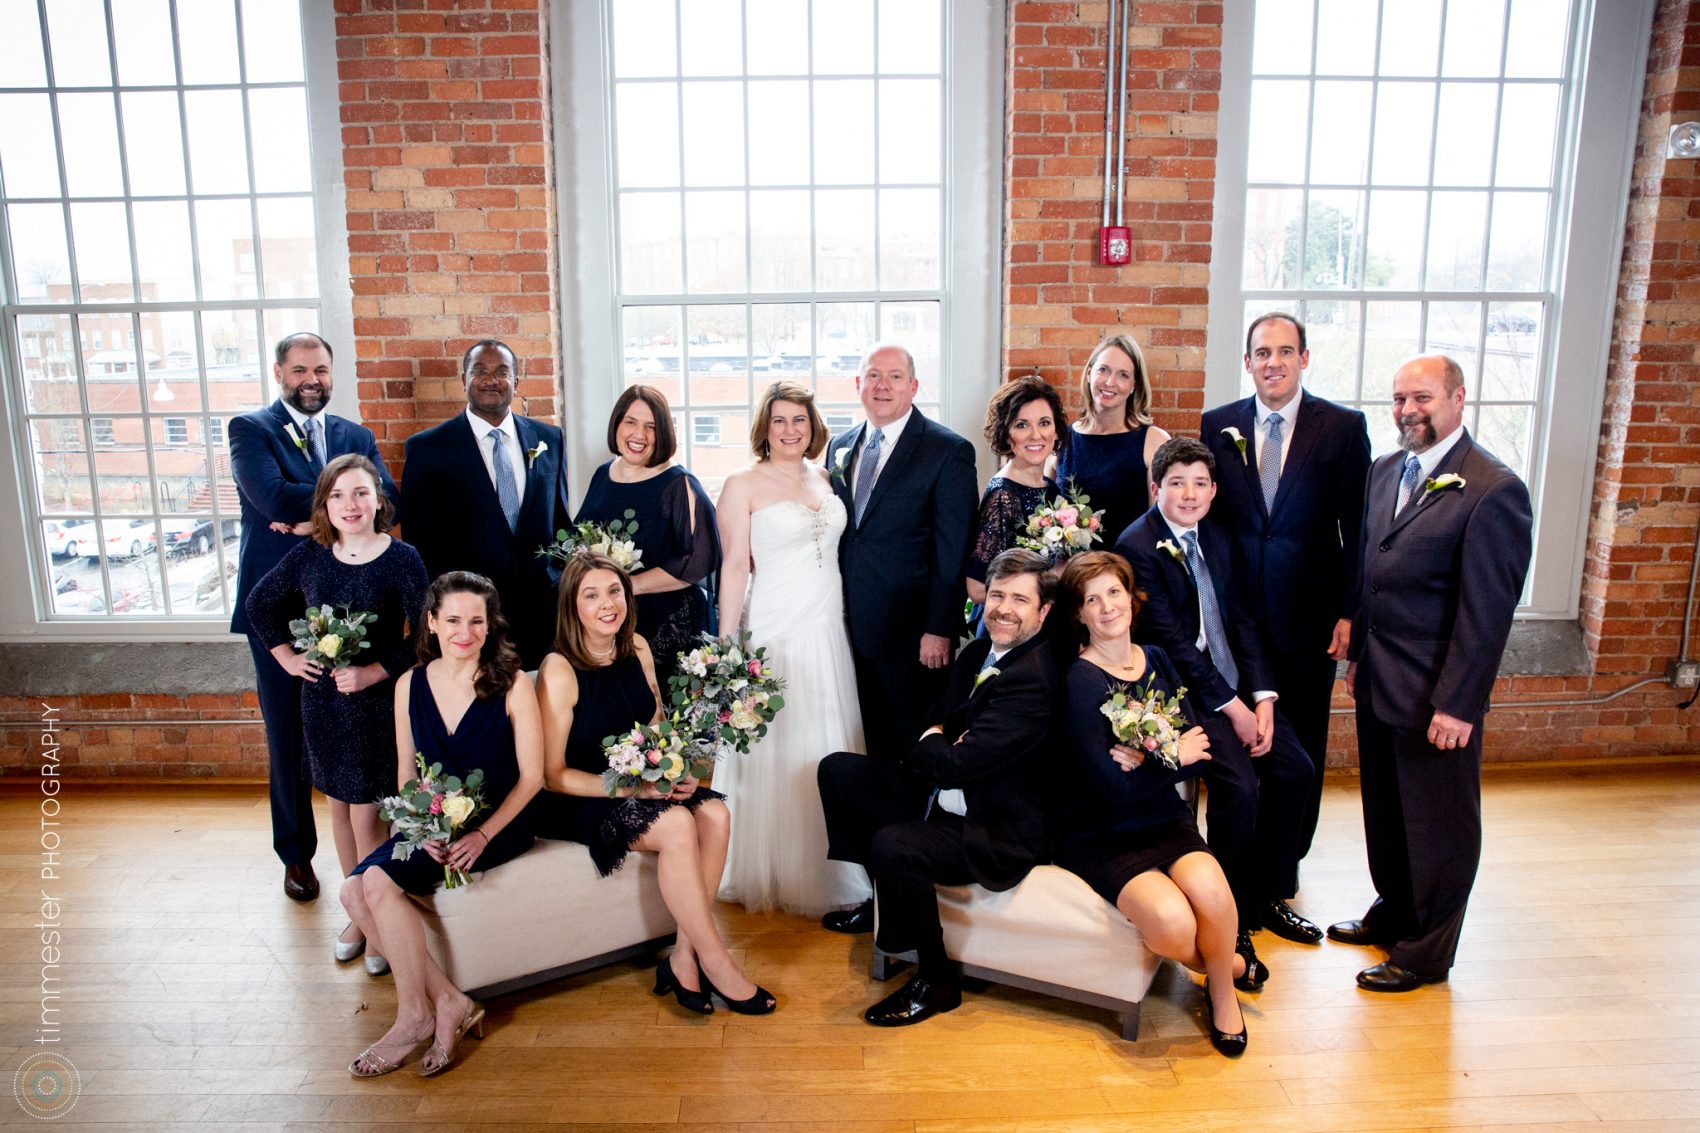 Wedding party portraits at The Cotton Room in Durham, NC.